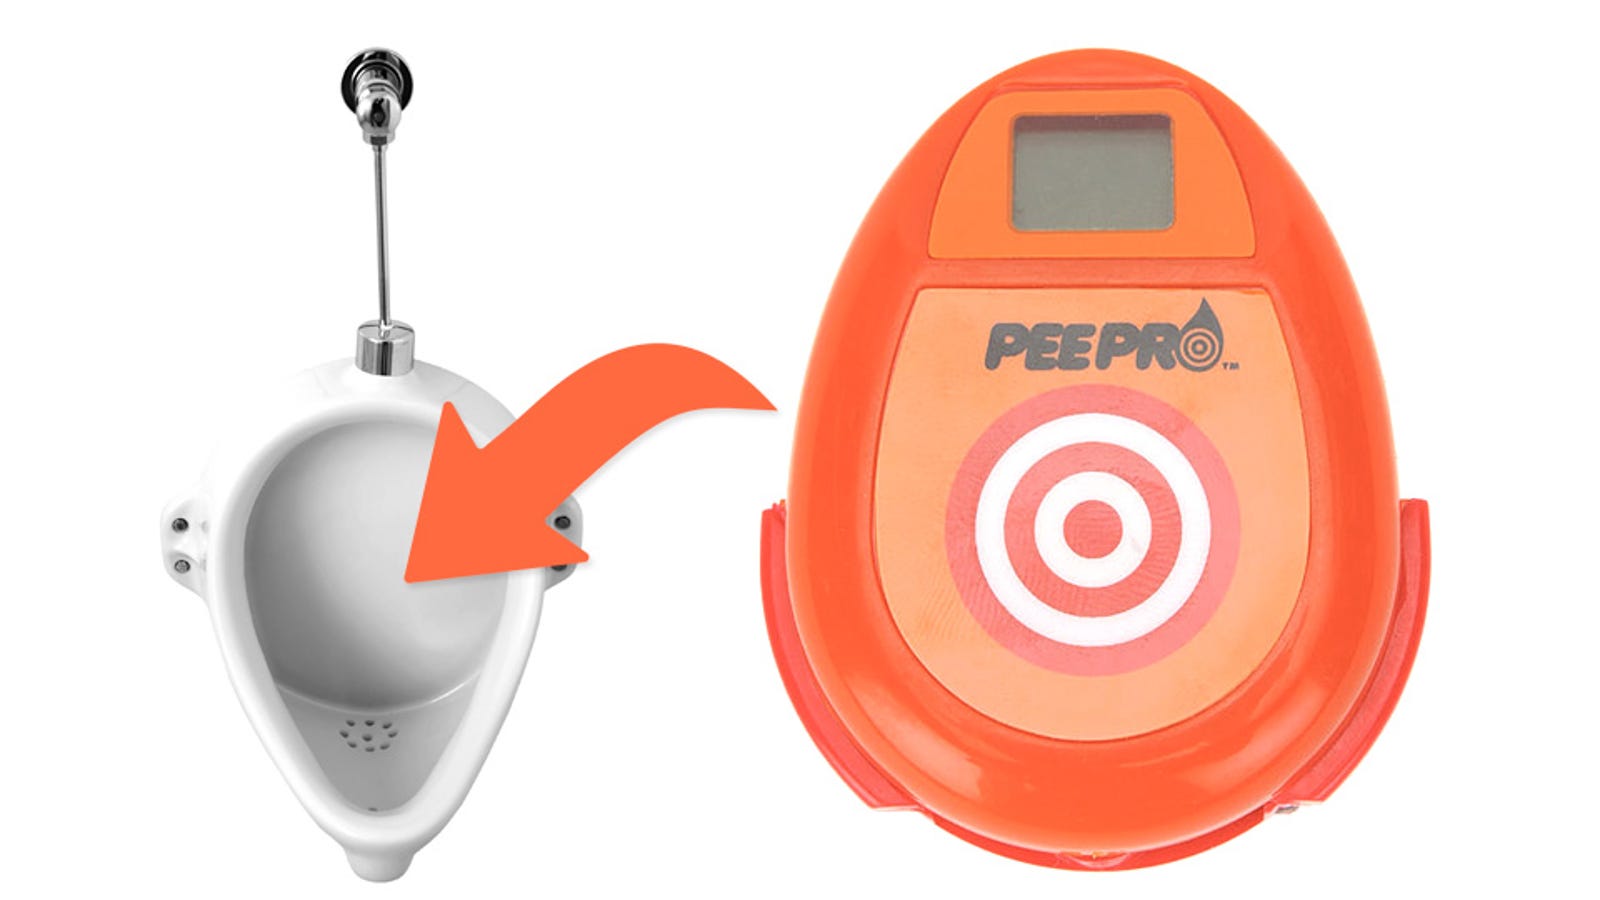 Pee Pro Urinal Target Turns Your Toilet Into A Carnival Game 2220